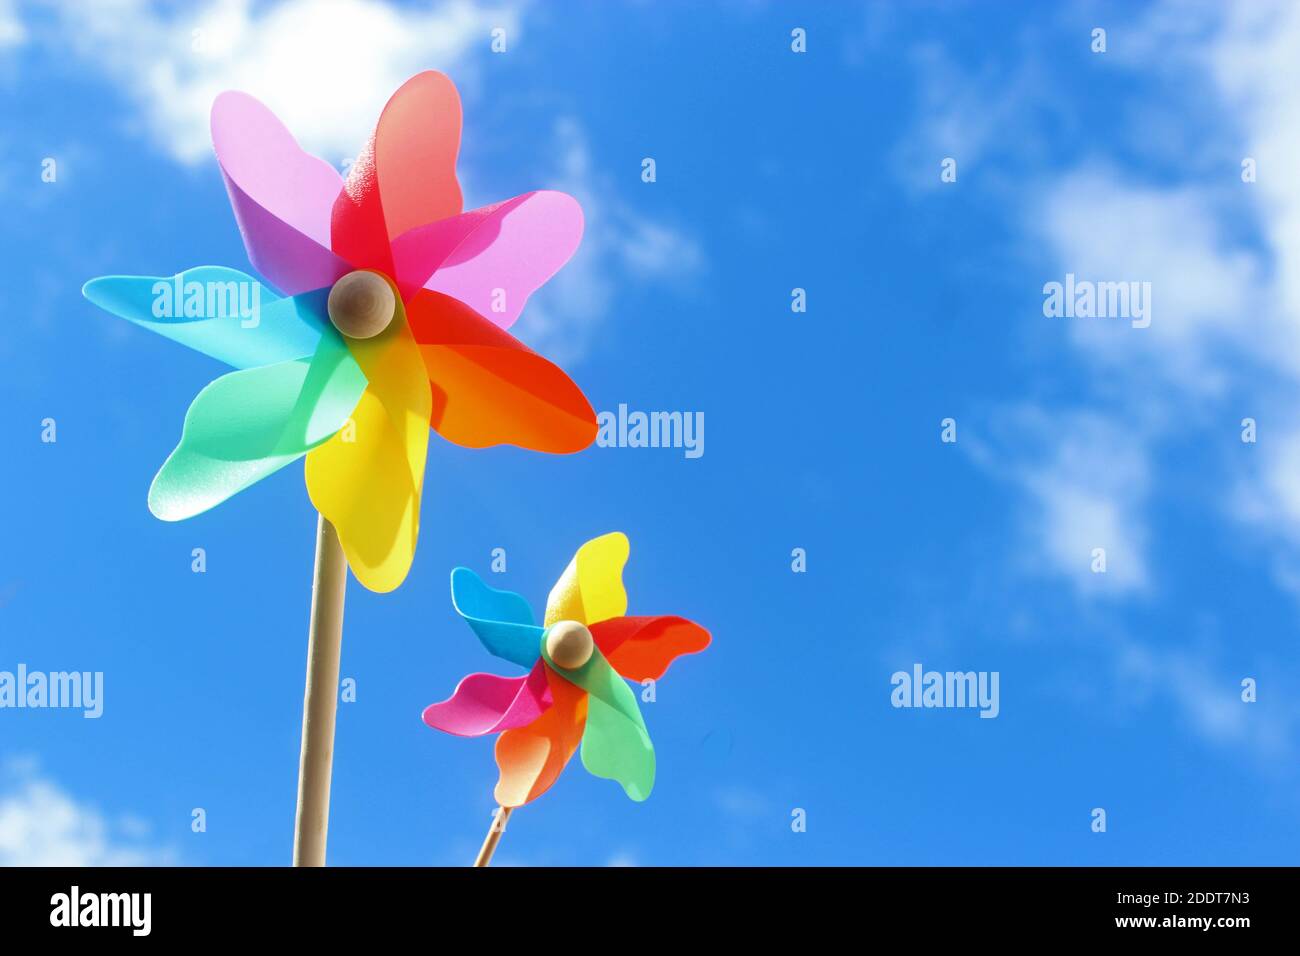 a small and a large pinwheel toy, blue sky with white clouds Stock Photo